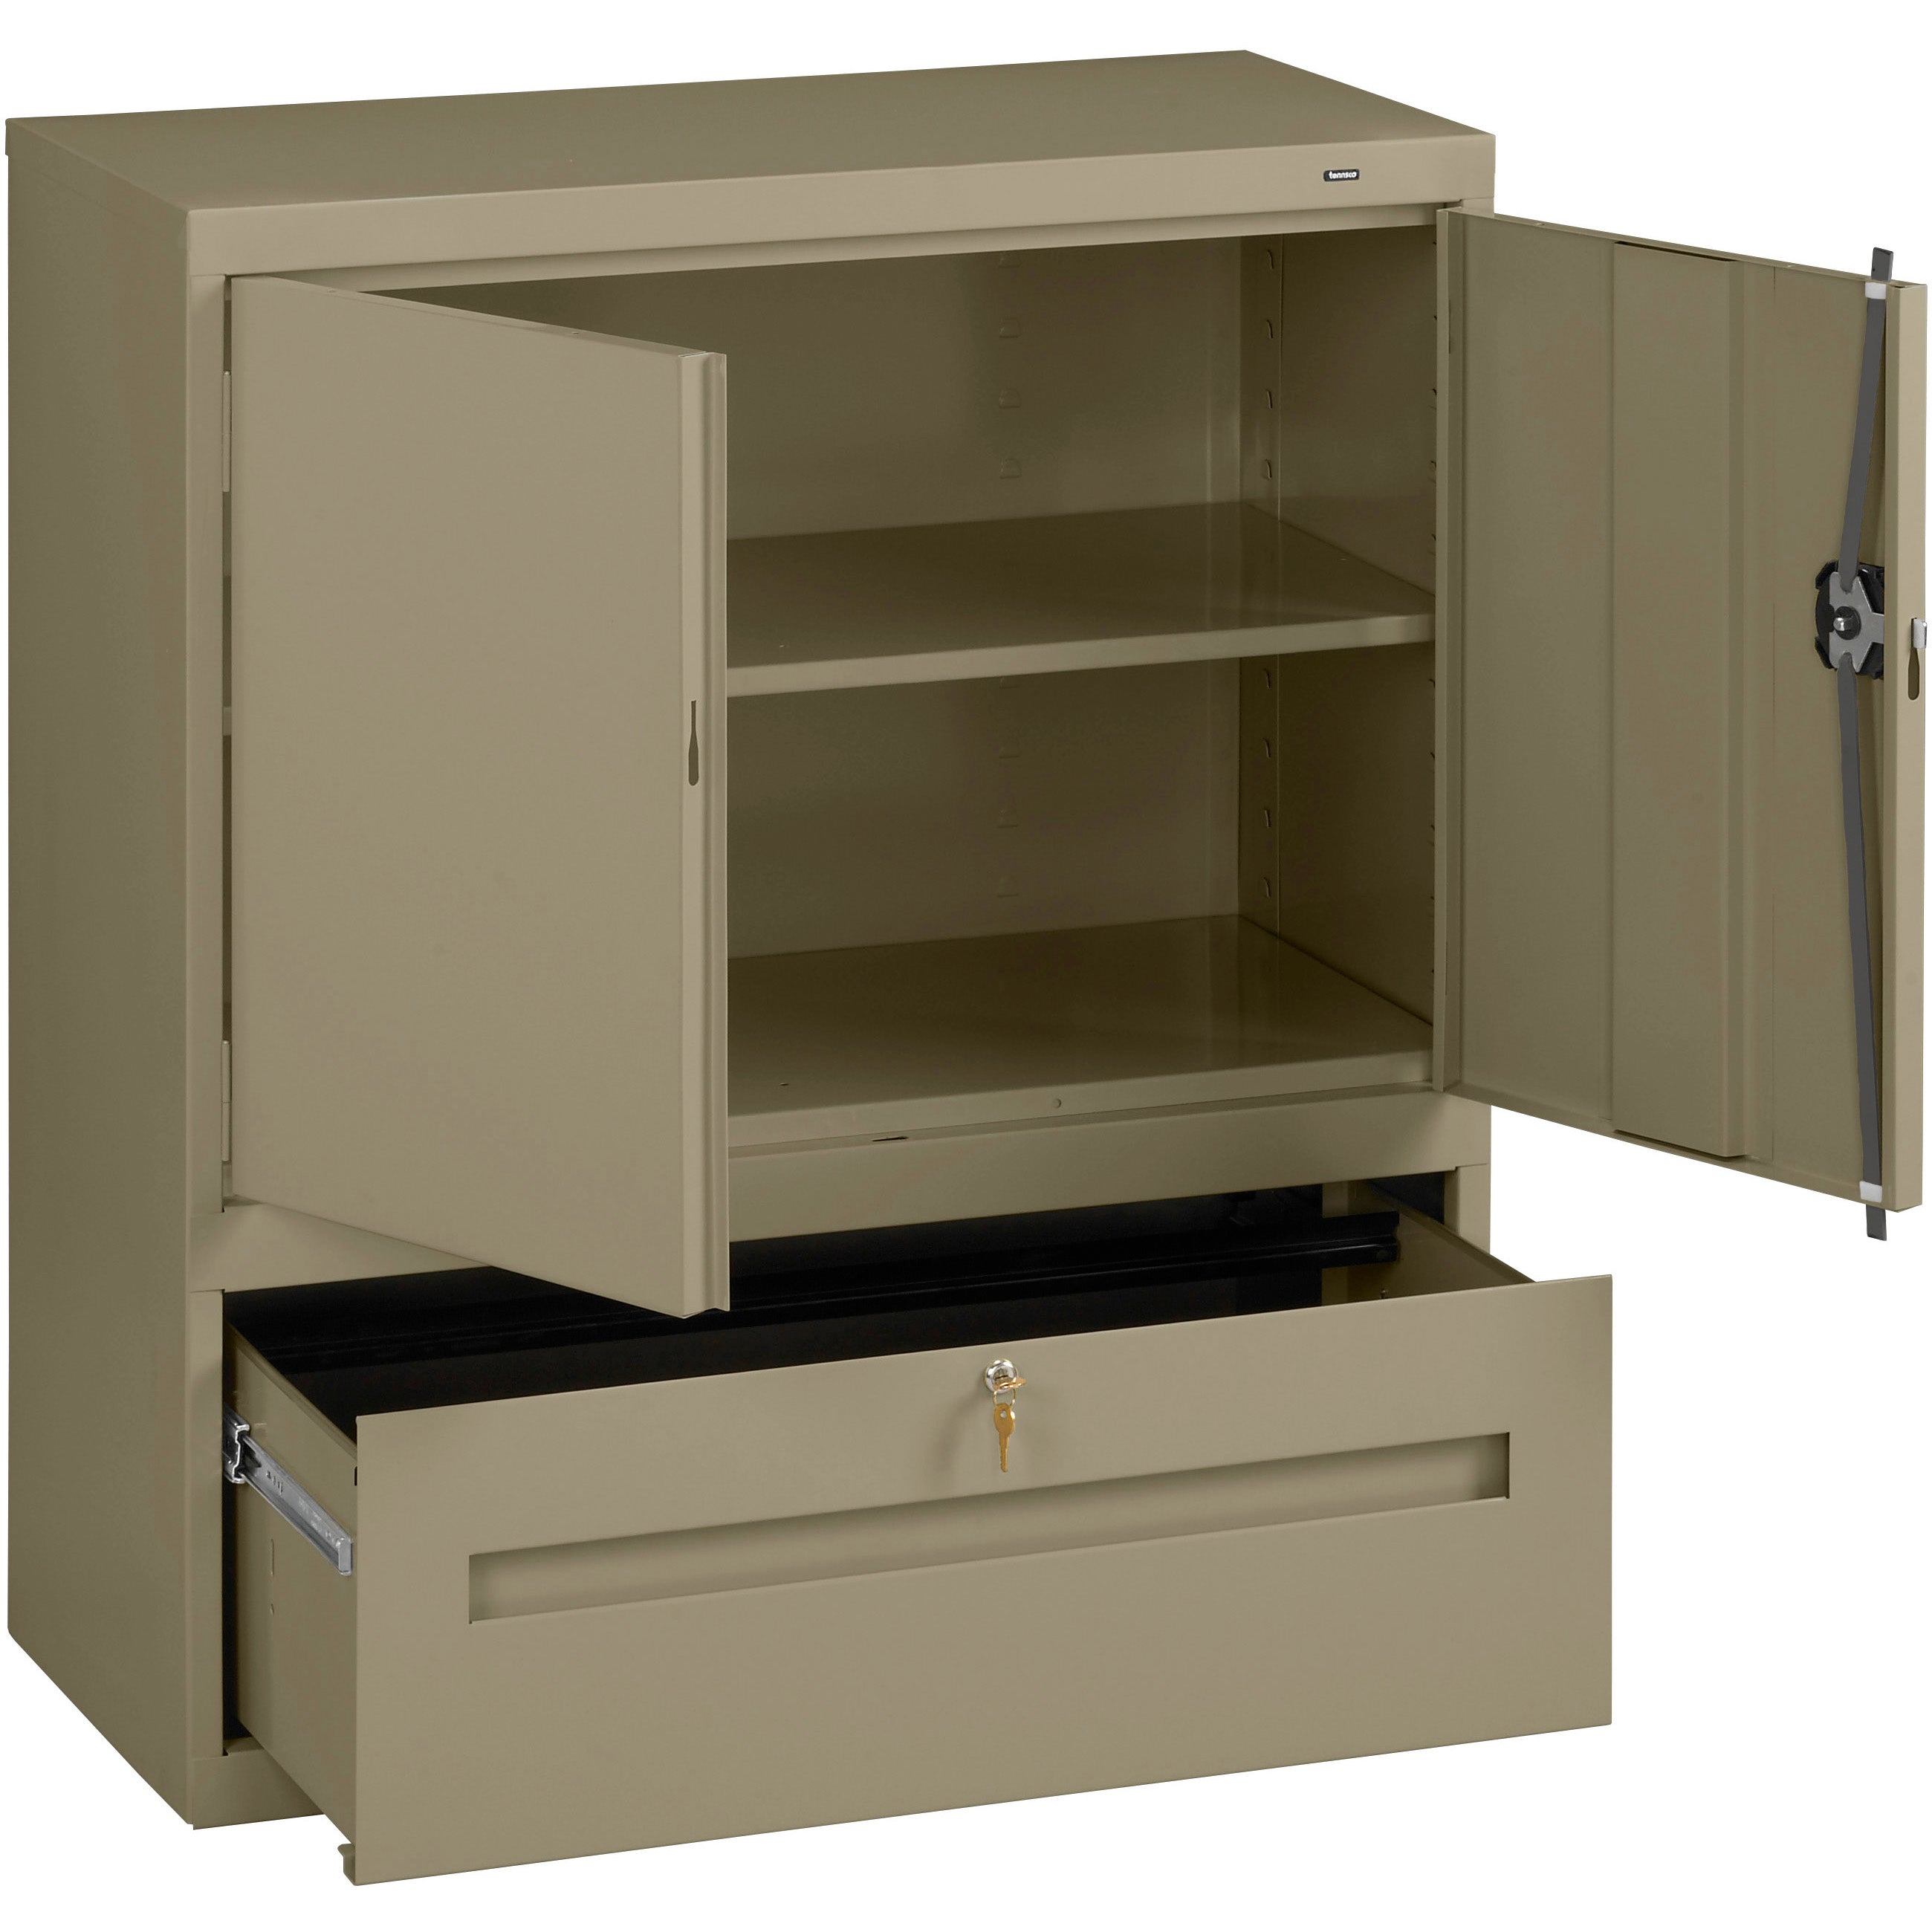 Tennsco 42" High Storage Cabinet with File Drawer - Assembled, DWR-4218